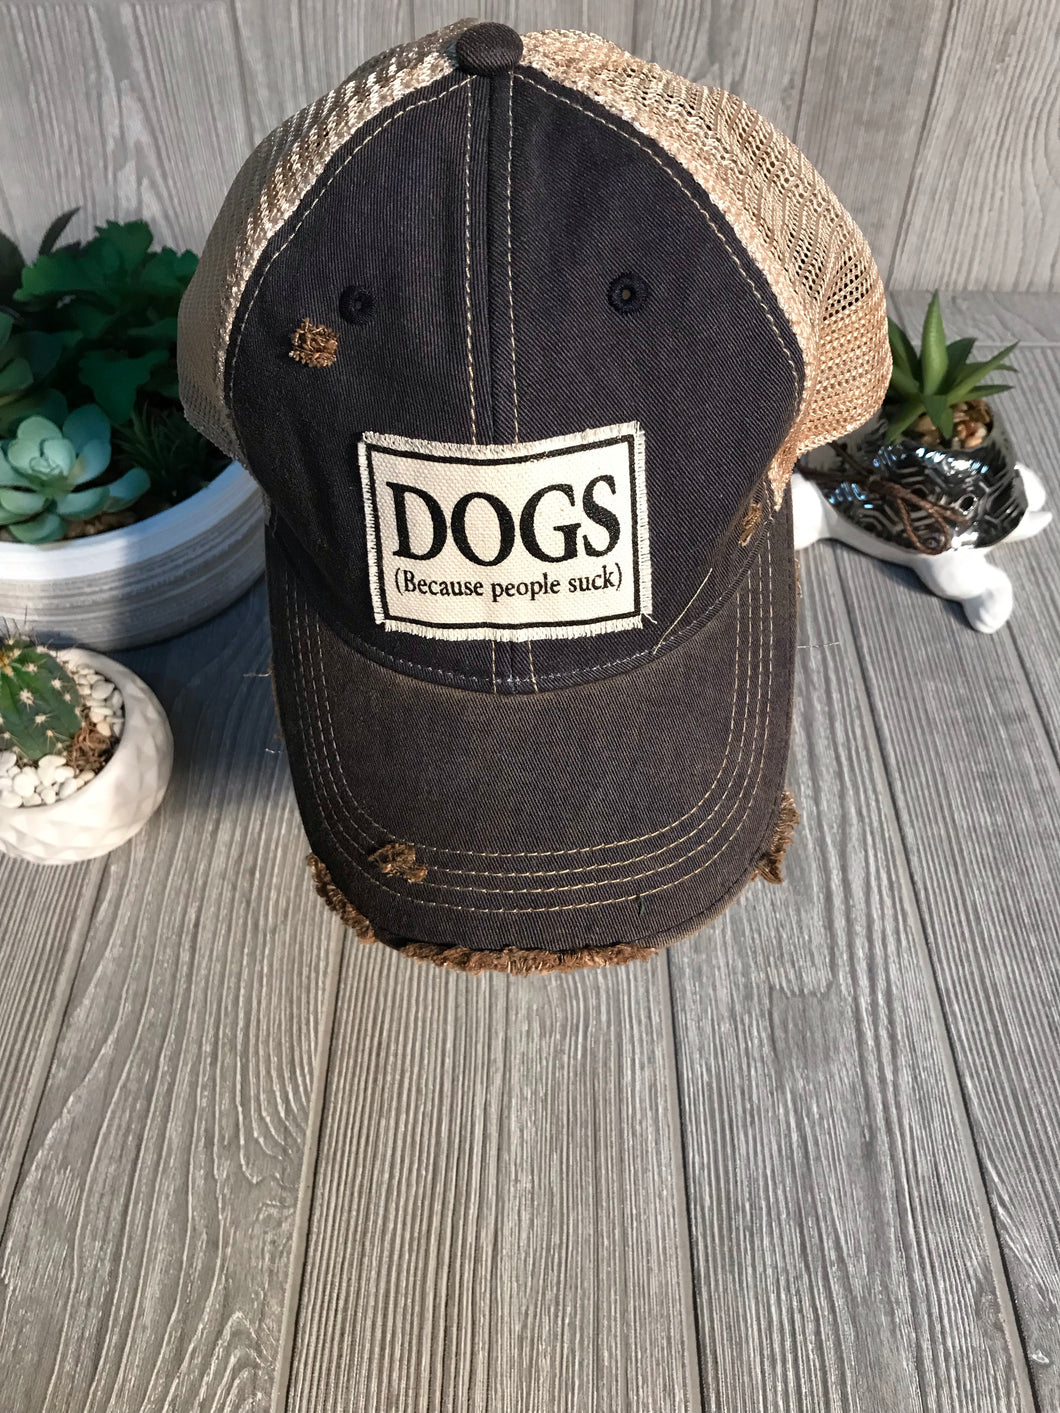 Vintage DOGS (Because people suck) Hat